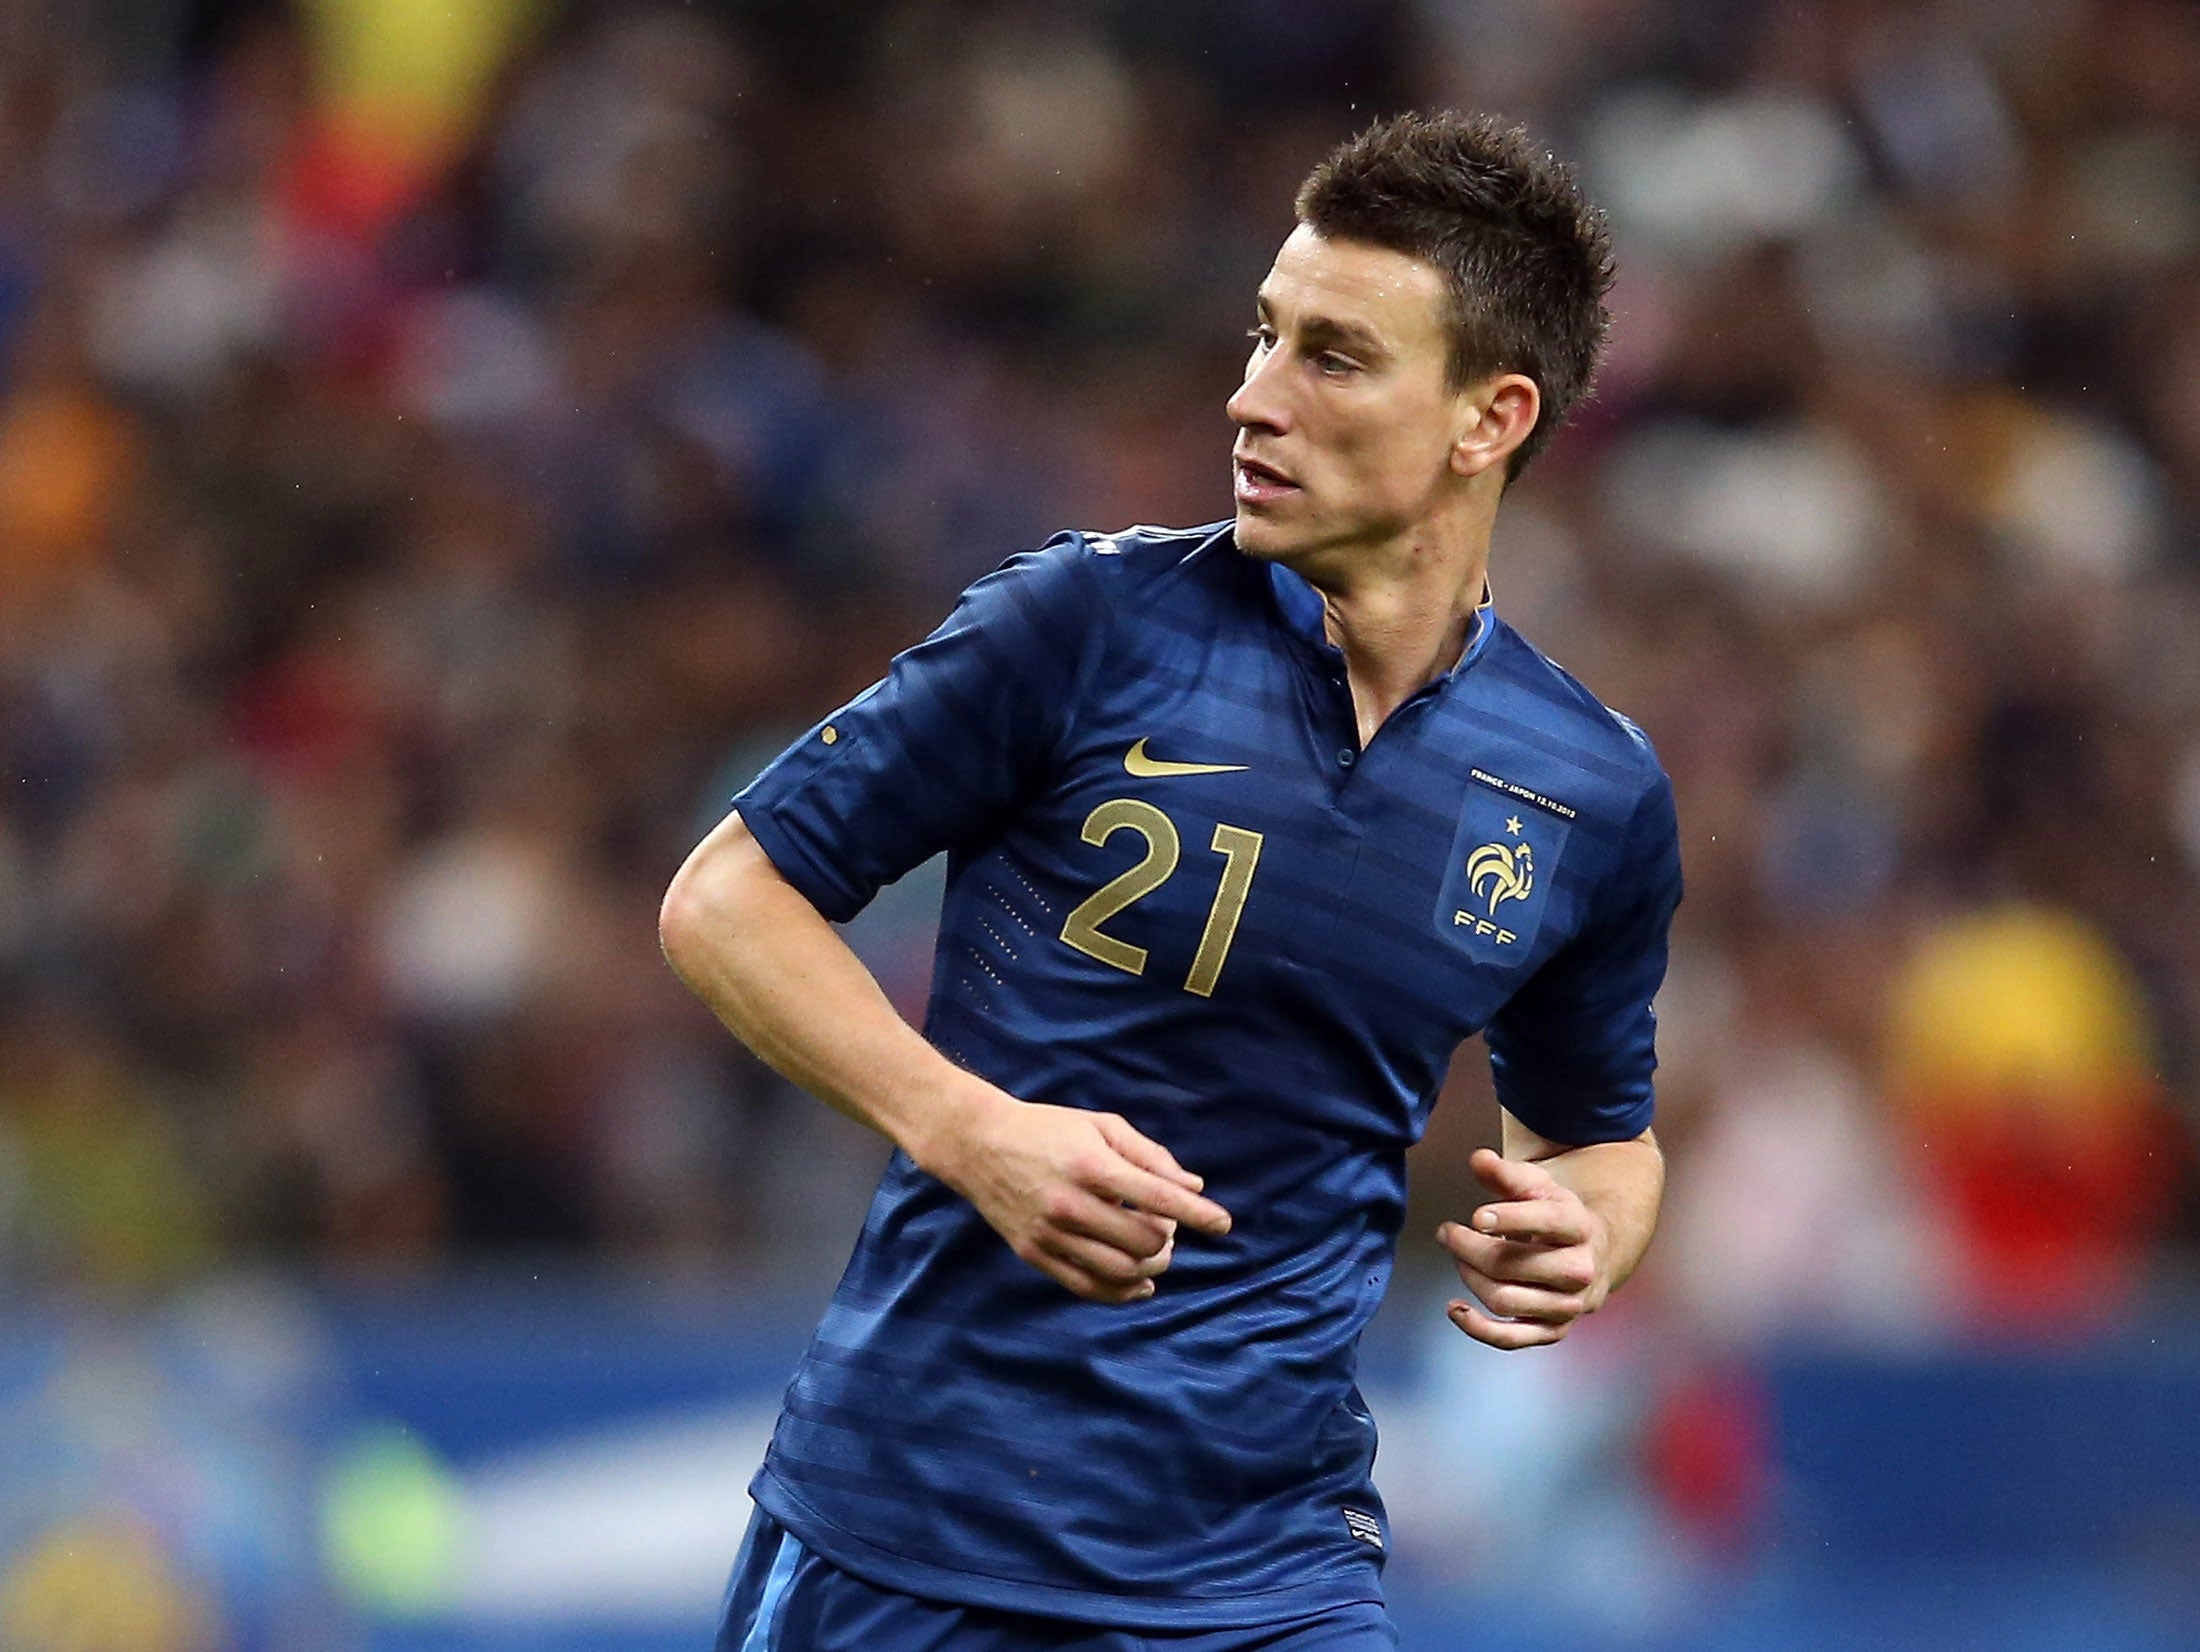 Arsenal defender Laurent Koscielny will feature for France at the World Cup